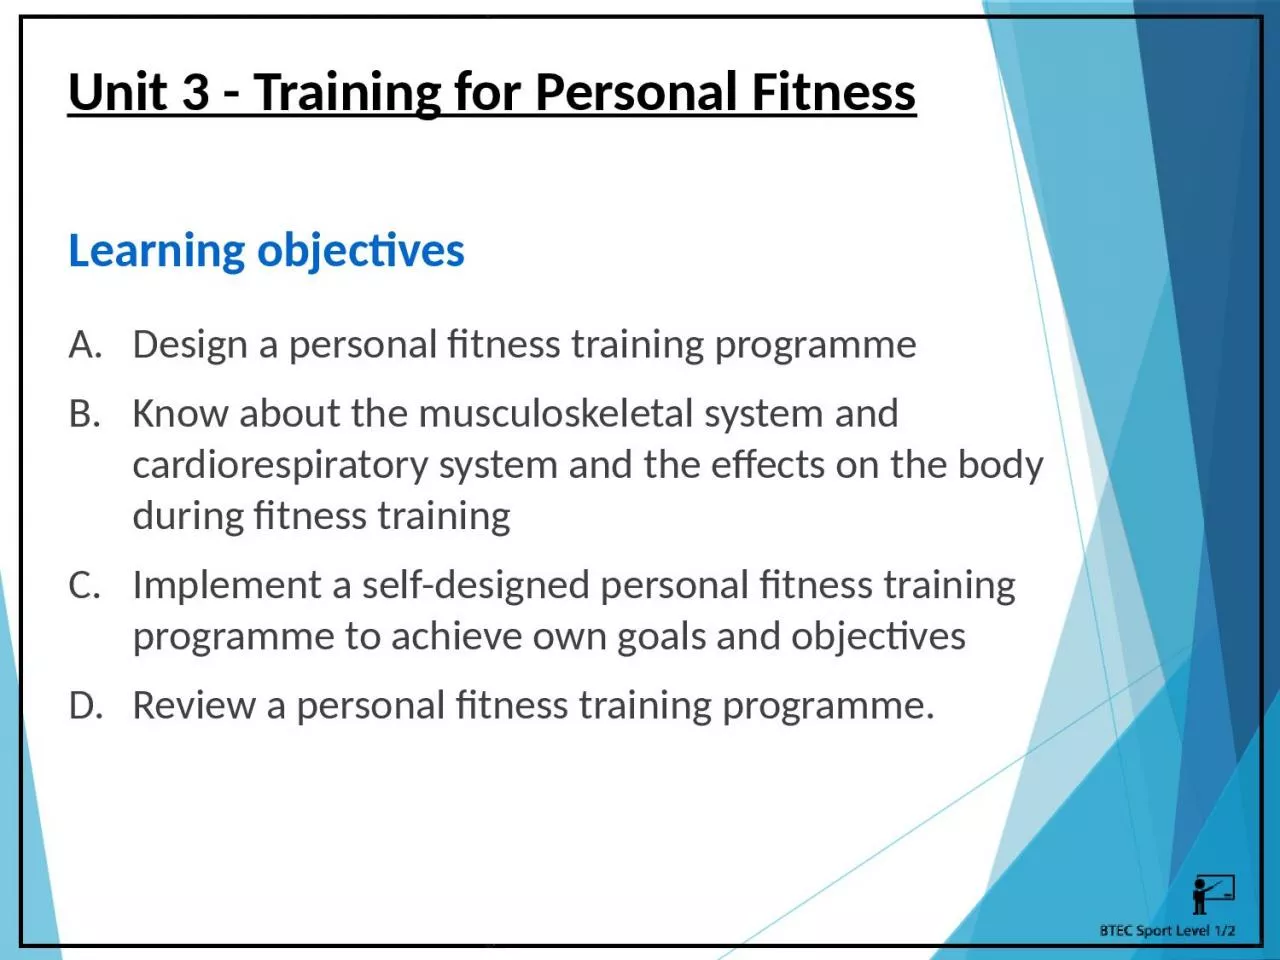 Unit 3 - Training for Personal Fitness